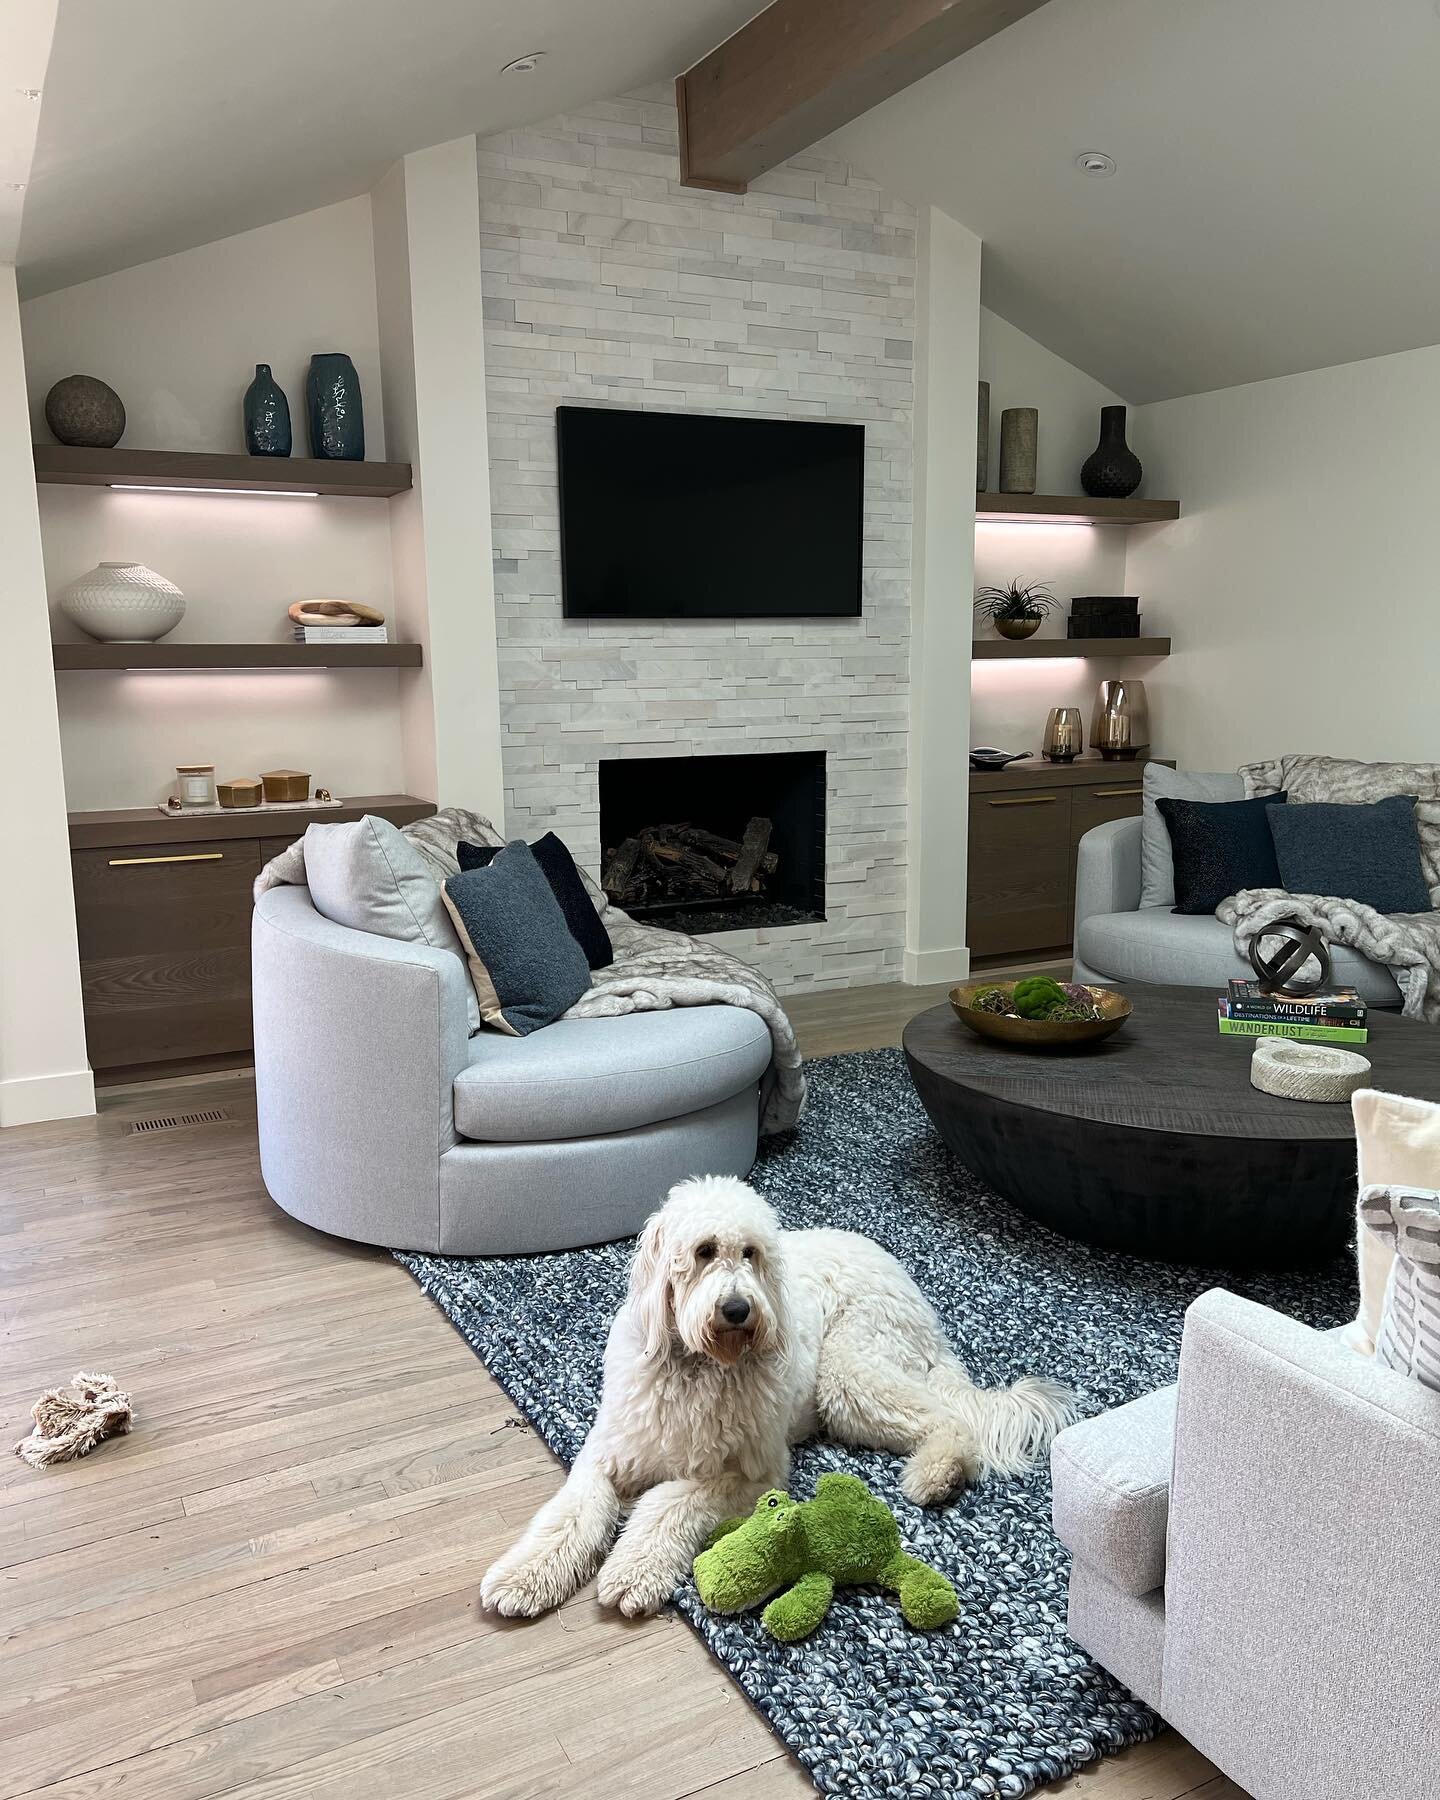 Sneak Peak! Finishing up a project in #cherryhills &amp; thought I&rsquo;d share. We&rsquo;re still playing around with accessories and artwork, but it&rsquo;s looking great so far! Also I am obsessed with my client&rsquo;s dogs.🐩 🥰 Swipe for the &